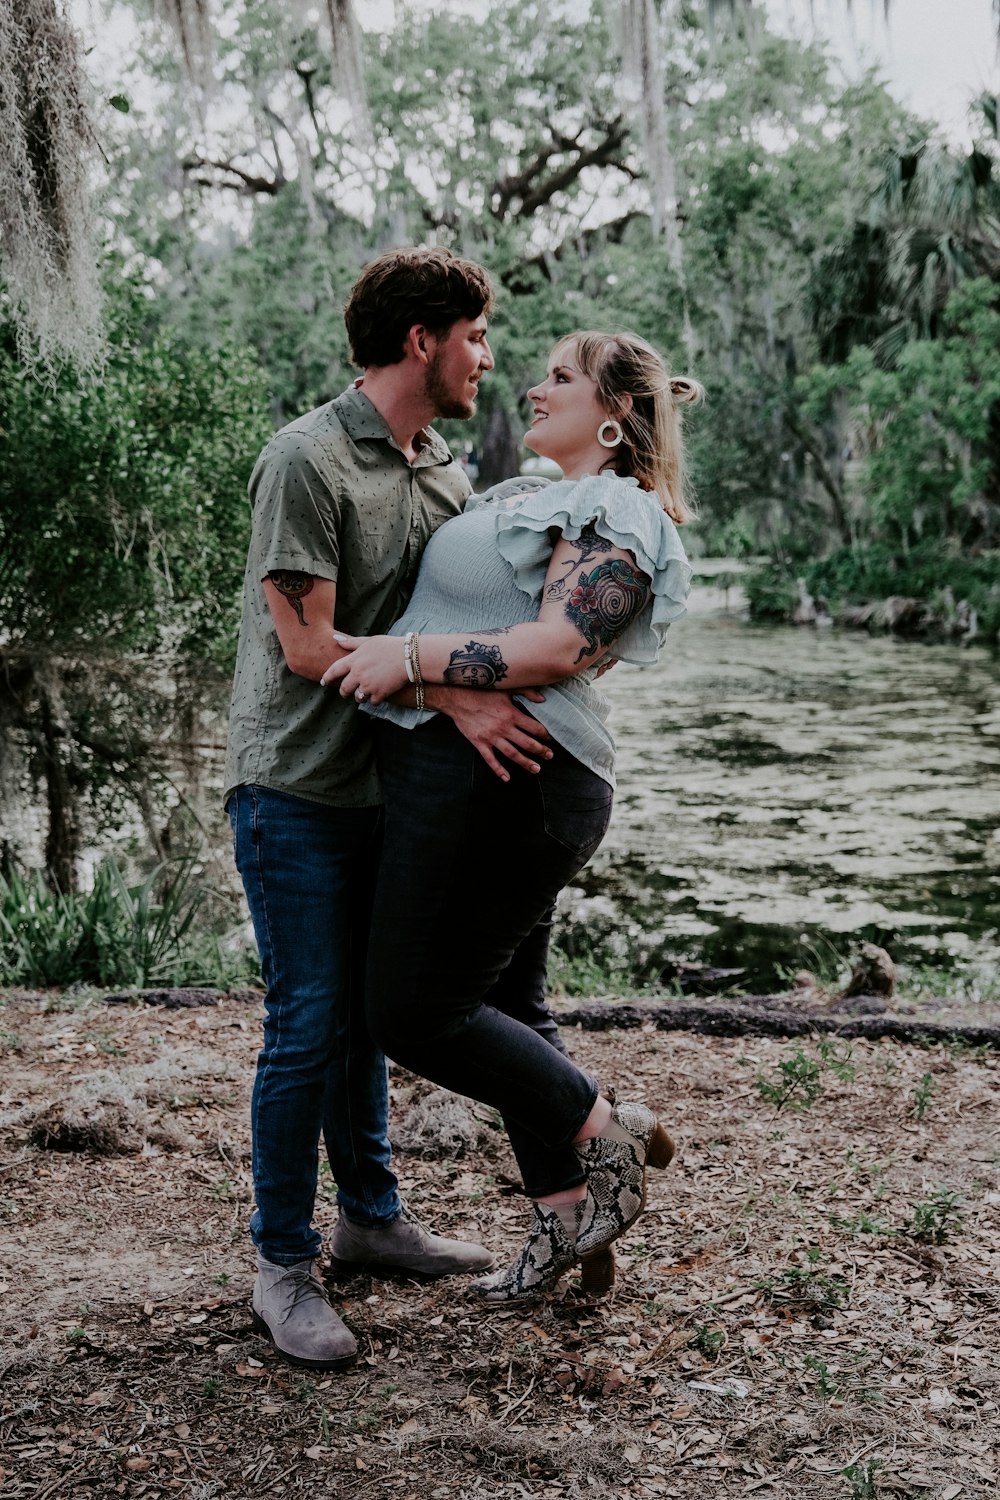 Man in gray shirt and blue denim jeans carrying woman in gray shirt photo –  Free Usa Image on Unsplash